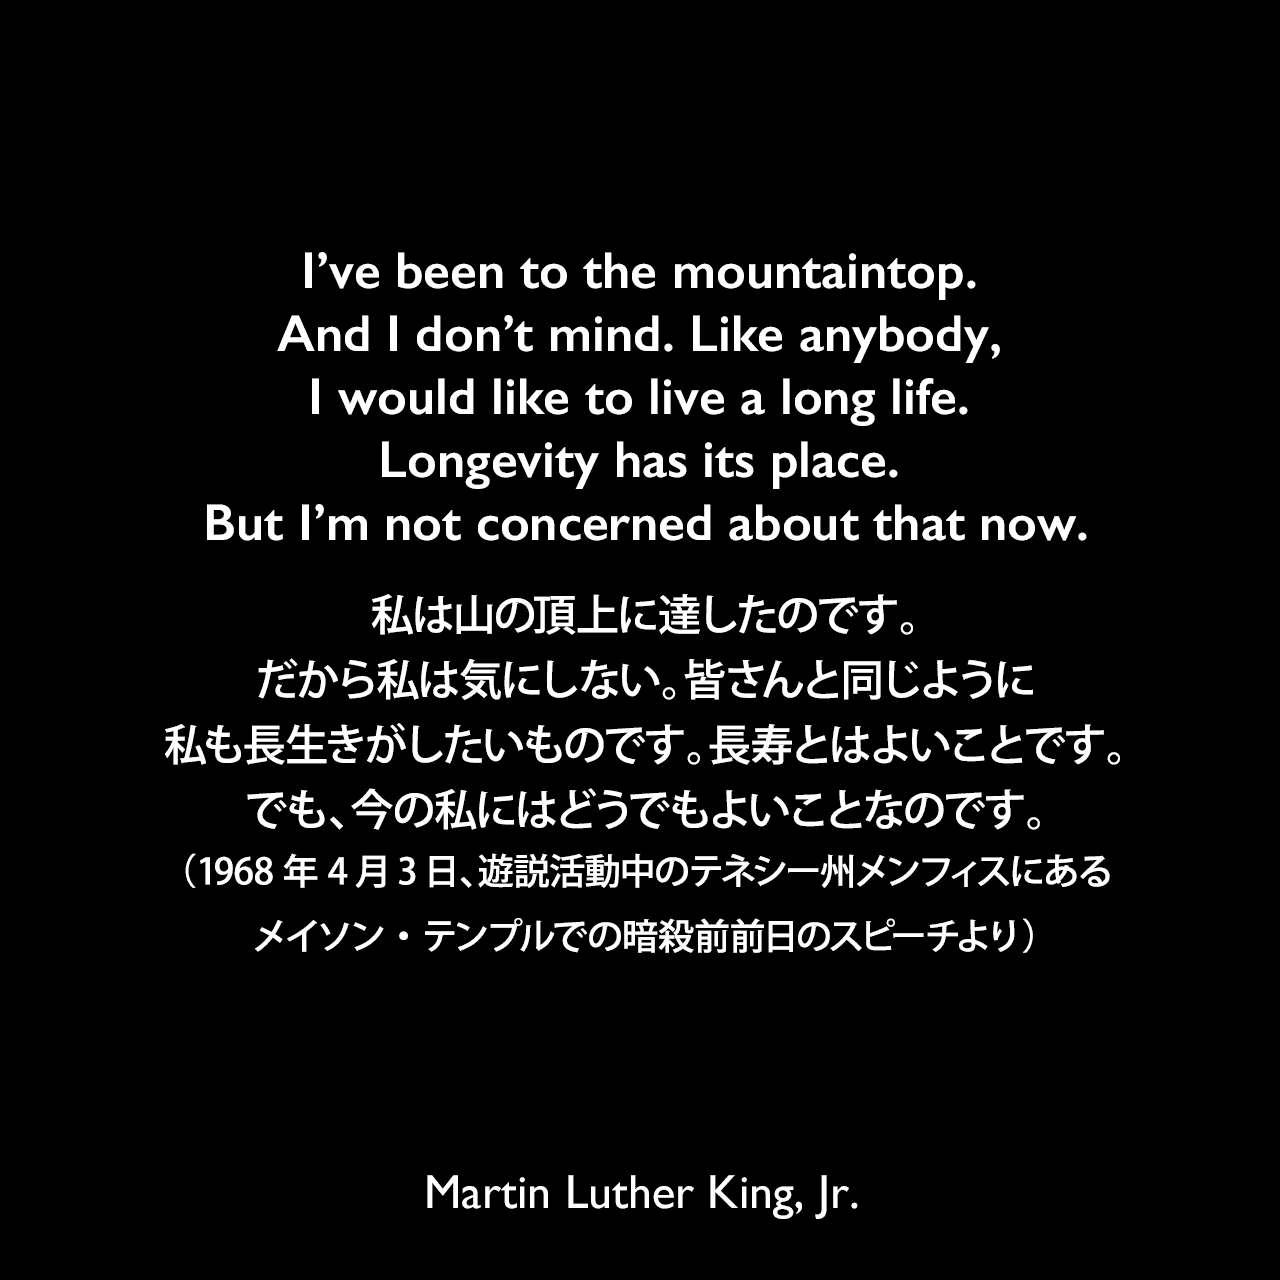 I’ve been to the mountaintop. And I don’t mind. Like anybody, I would like to live a long life. Longevity has its place. But I’m not concerned about that now.私は山の頂上に達したのです。だから私は気にしない。皆さんと同じように、私も長生きがしたいものです。長寿とはよいことです。でも、今の私にはどうでもよいことなのです。- 1968年4月3日、遊説活動中のテネシー州メンフィスにあるメイソン・テンプルでの暗殺前前日のスピーチよりMartin Luther King, Jr.